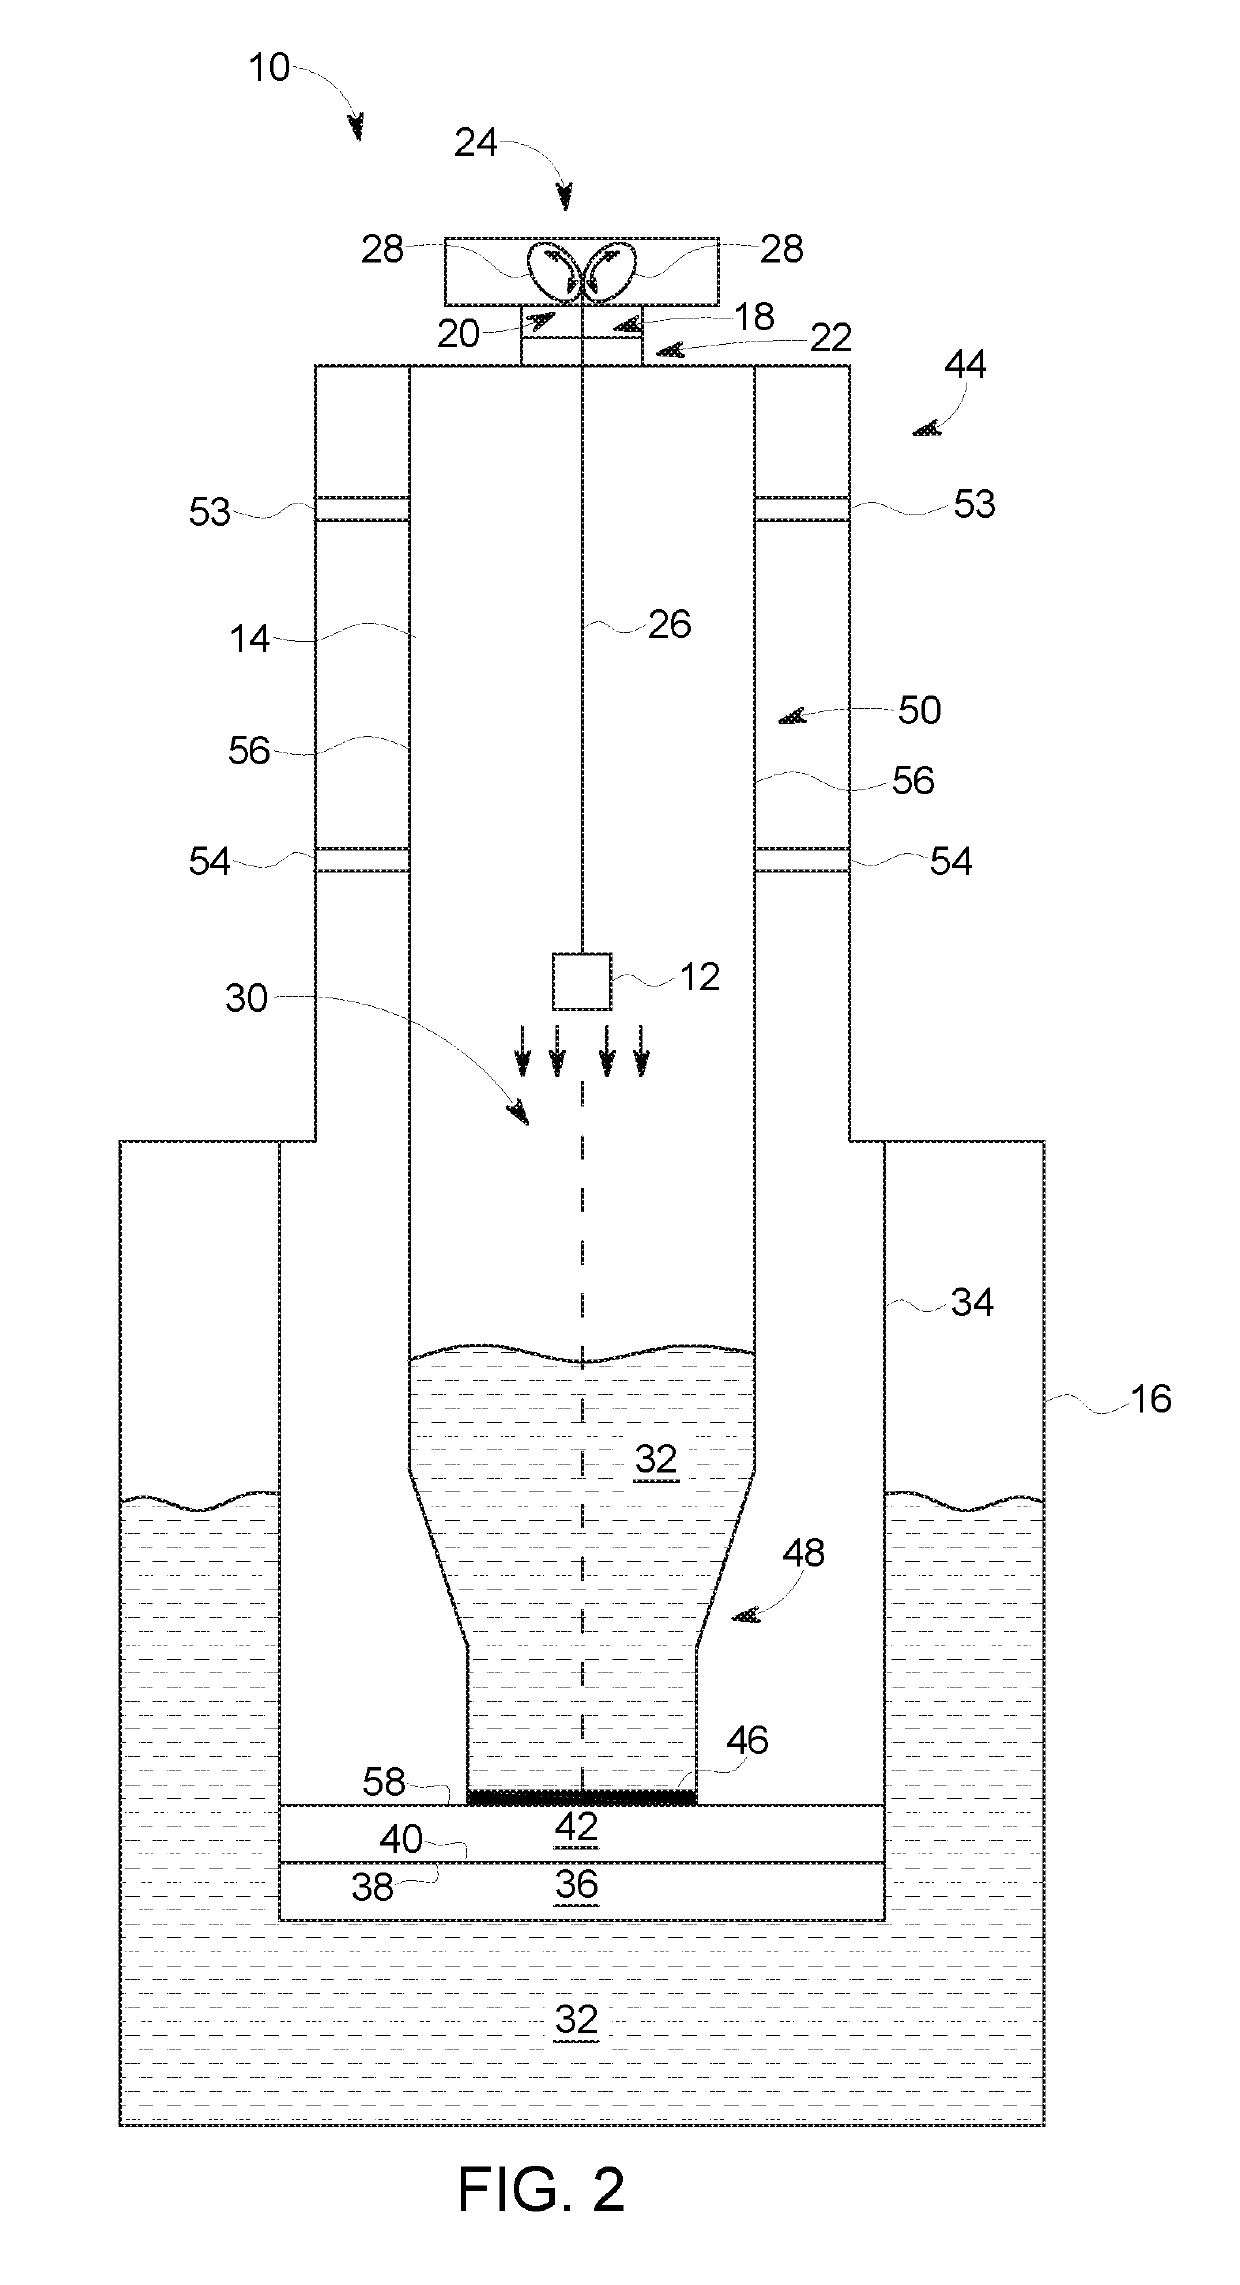 Fluid path insert for a cryogenic cooling system